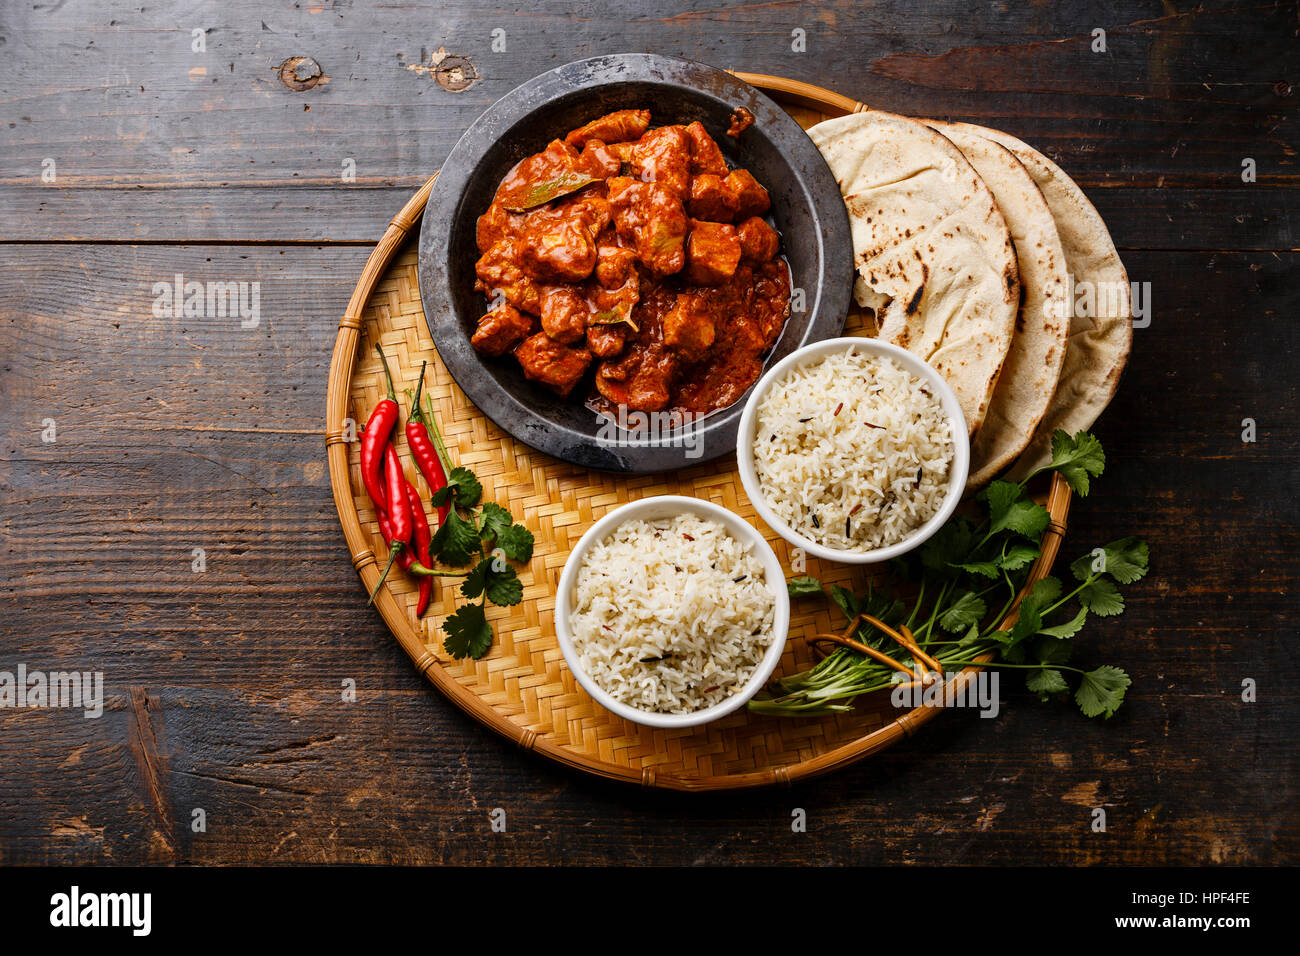 Chicken tikka masala spicy curry meat food with rice and naan bread on wooden background Stock Photo